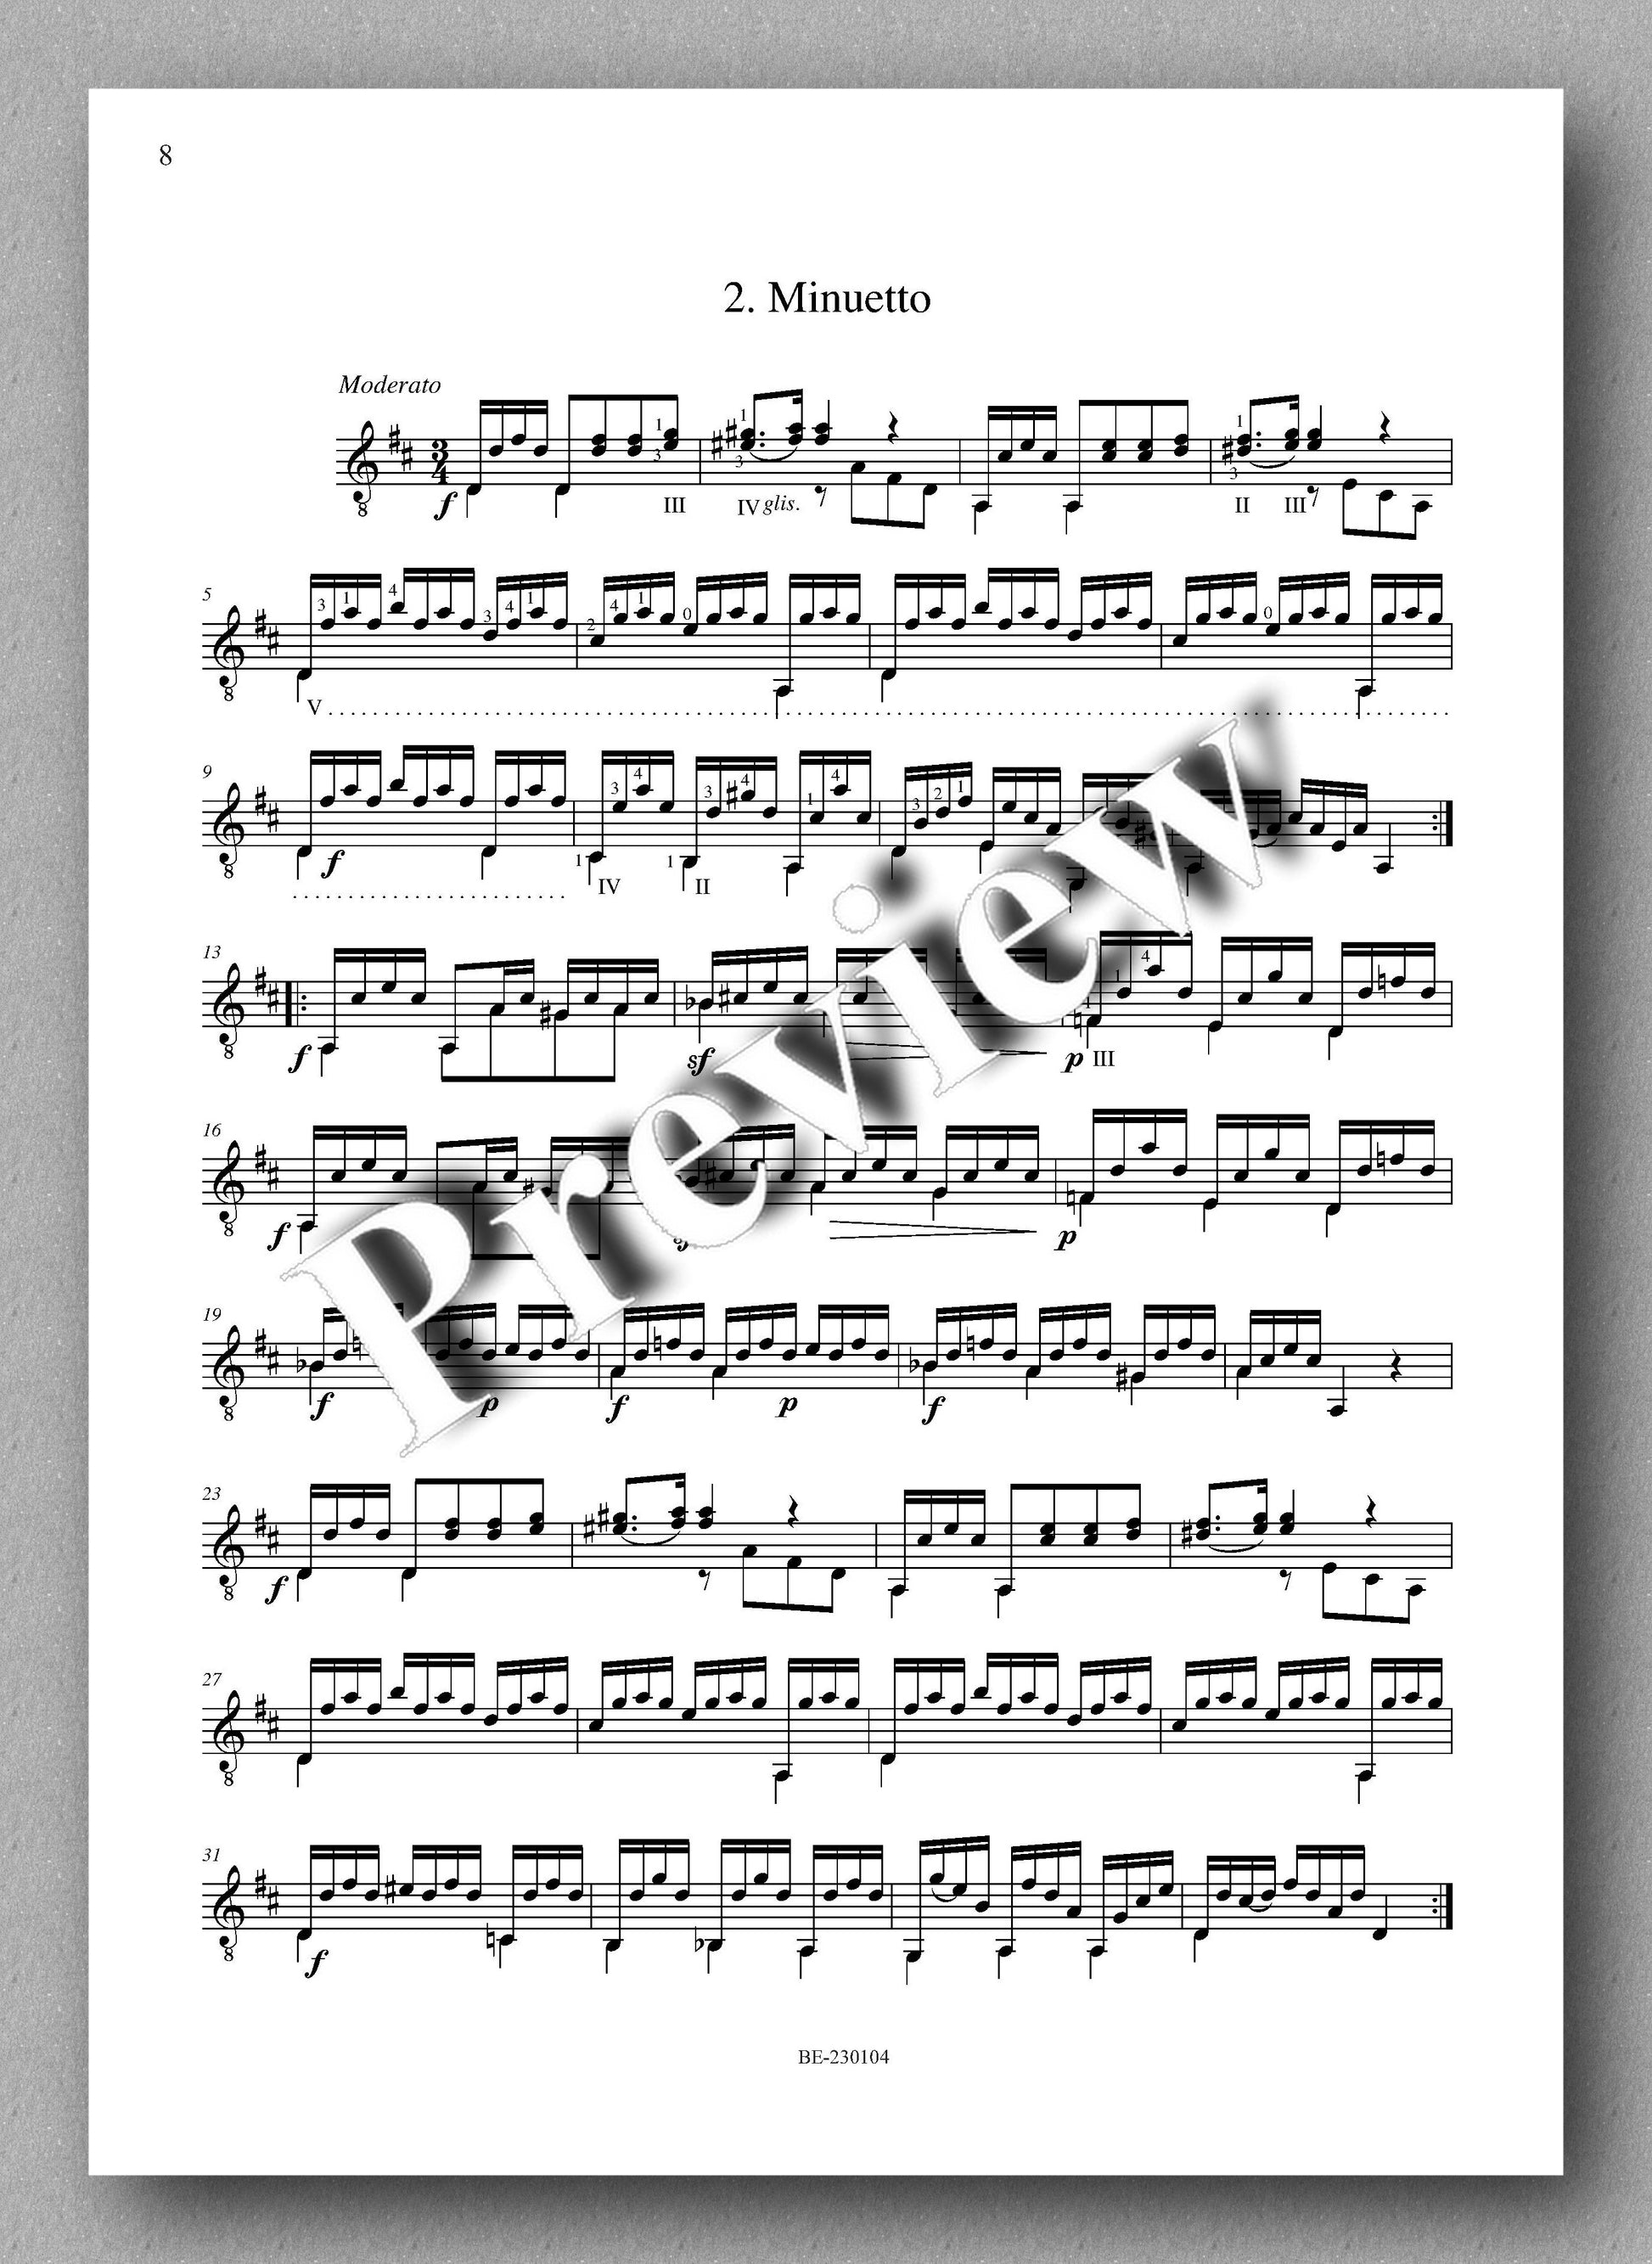 Molino, Collected Works for Guitar Solo, Vol. 16 - preview of the music score 2